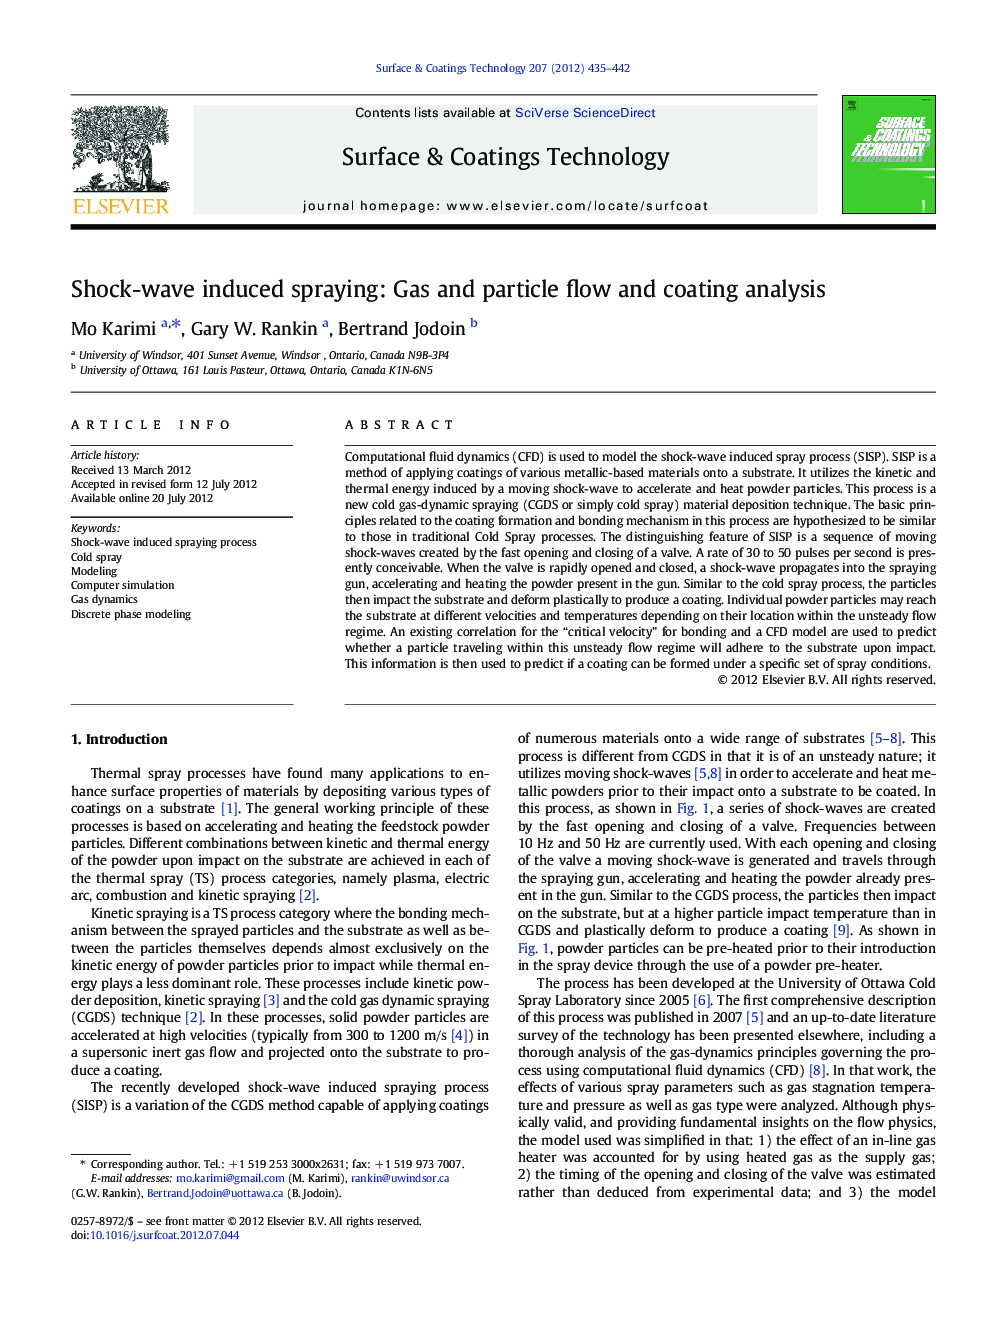 Shock-wave induced spraying: Gas and particle flow and coating analysis